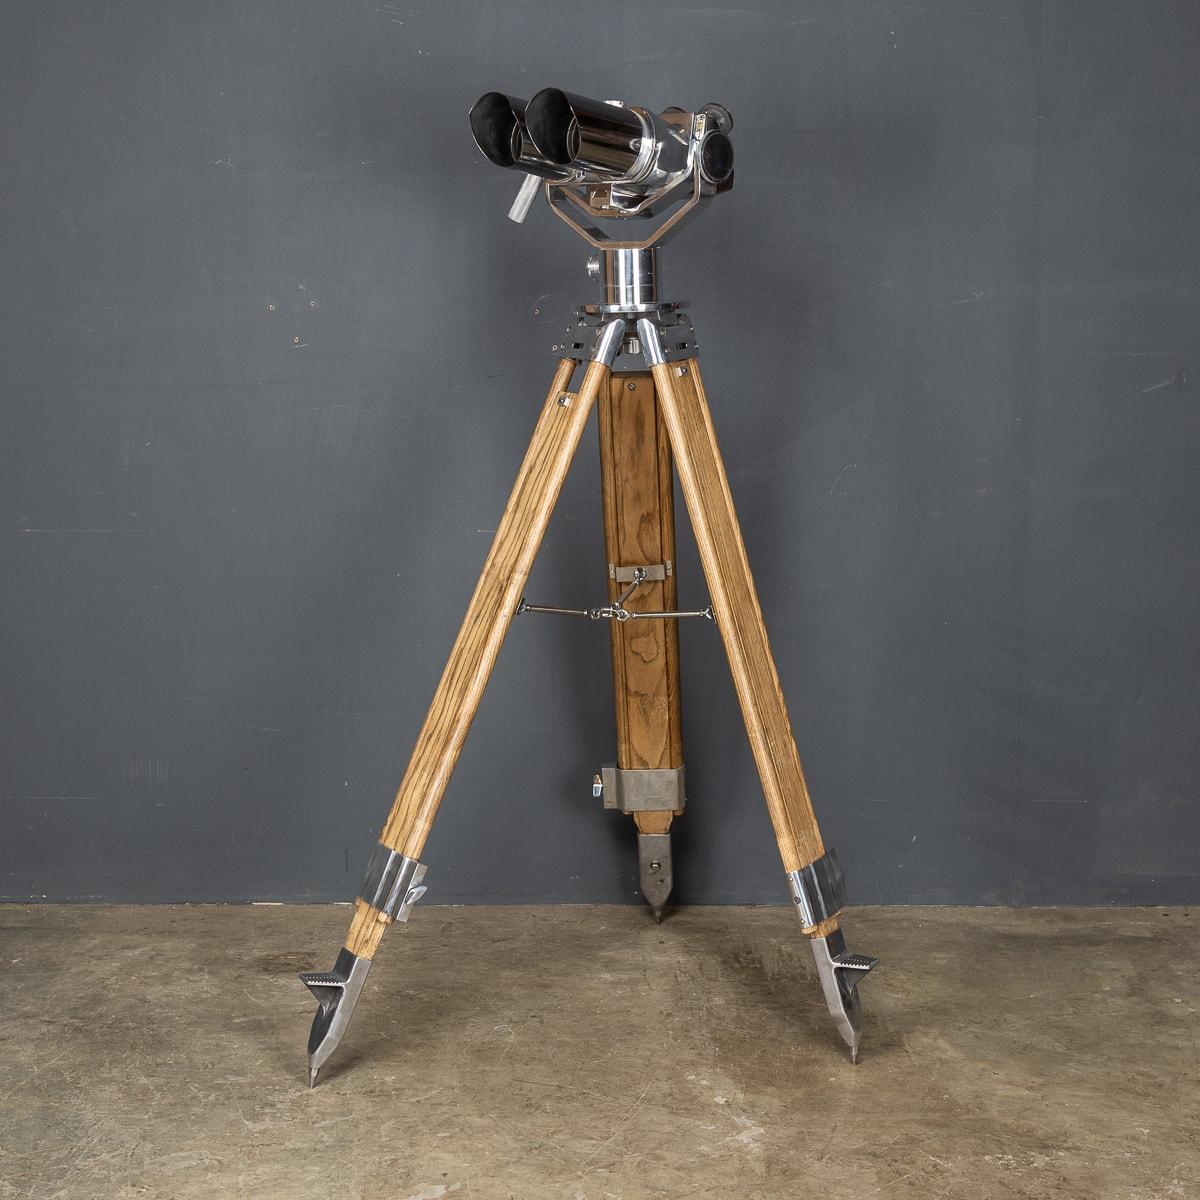 Exceptional 20th century German polished steel observation binoculars on a later telescopic stand by D.F. This model was originally designed by Emil Busch and it has been adopted by the military in 1936. The model is suitable for both day and night